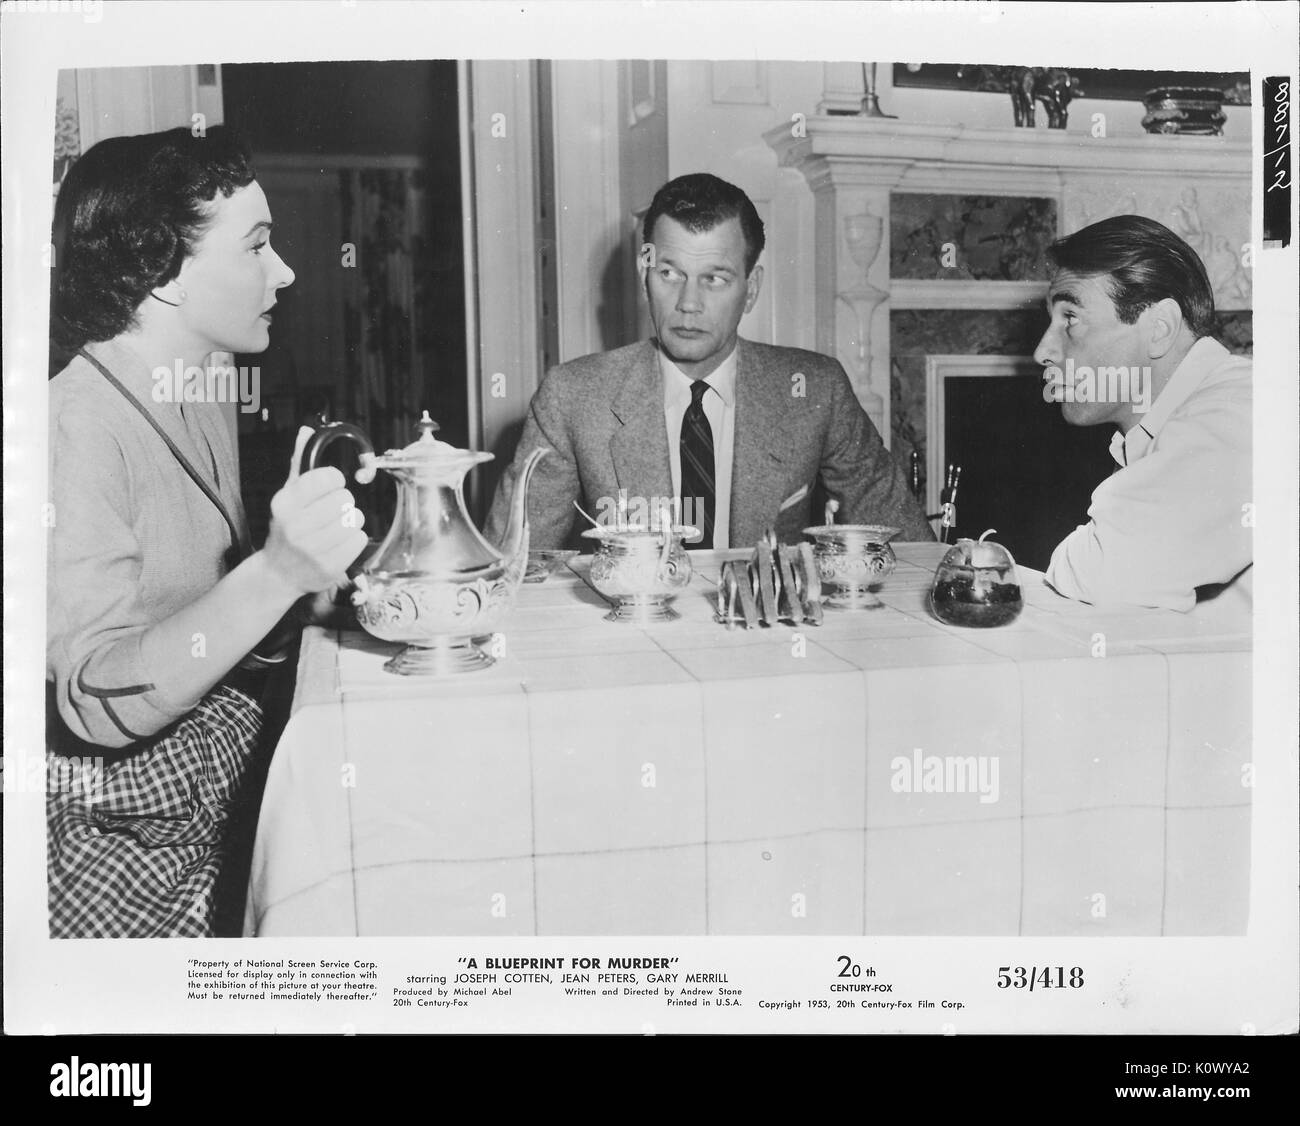 A movie still scene from 'A Blueprint For Murder' (1953 20th Century Fox thriller film), showing three seated people in serious discussion while the woman is holding an elegant tea pot and the two men are intently listening to her, 1953. Stock Photo